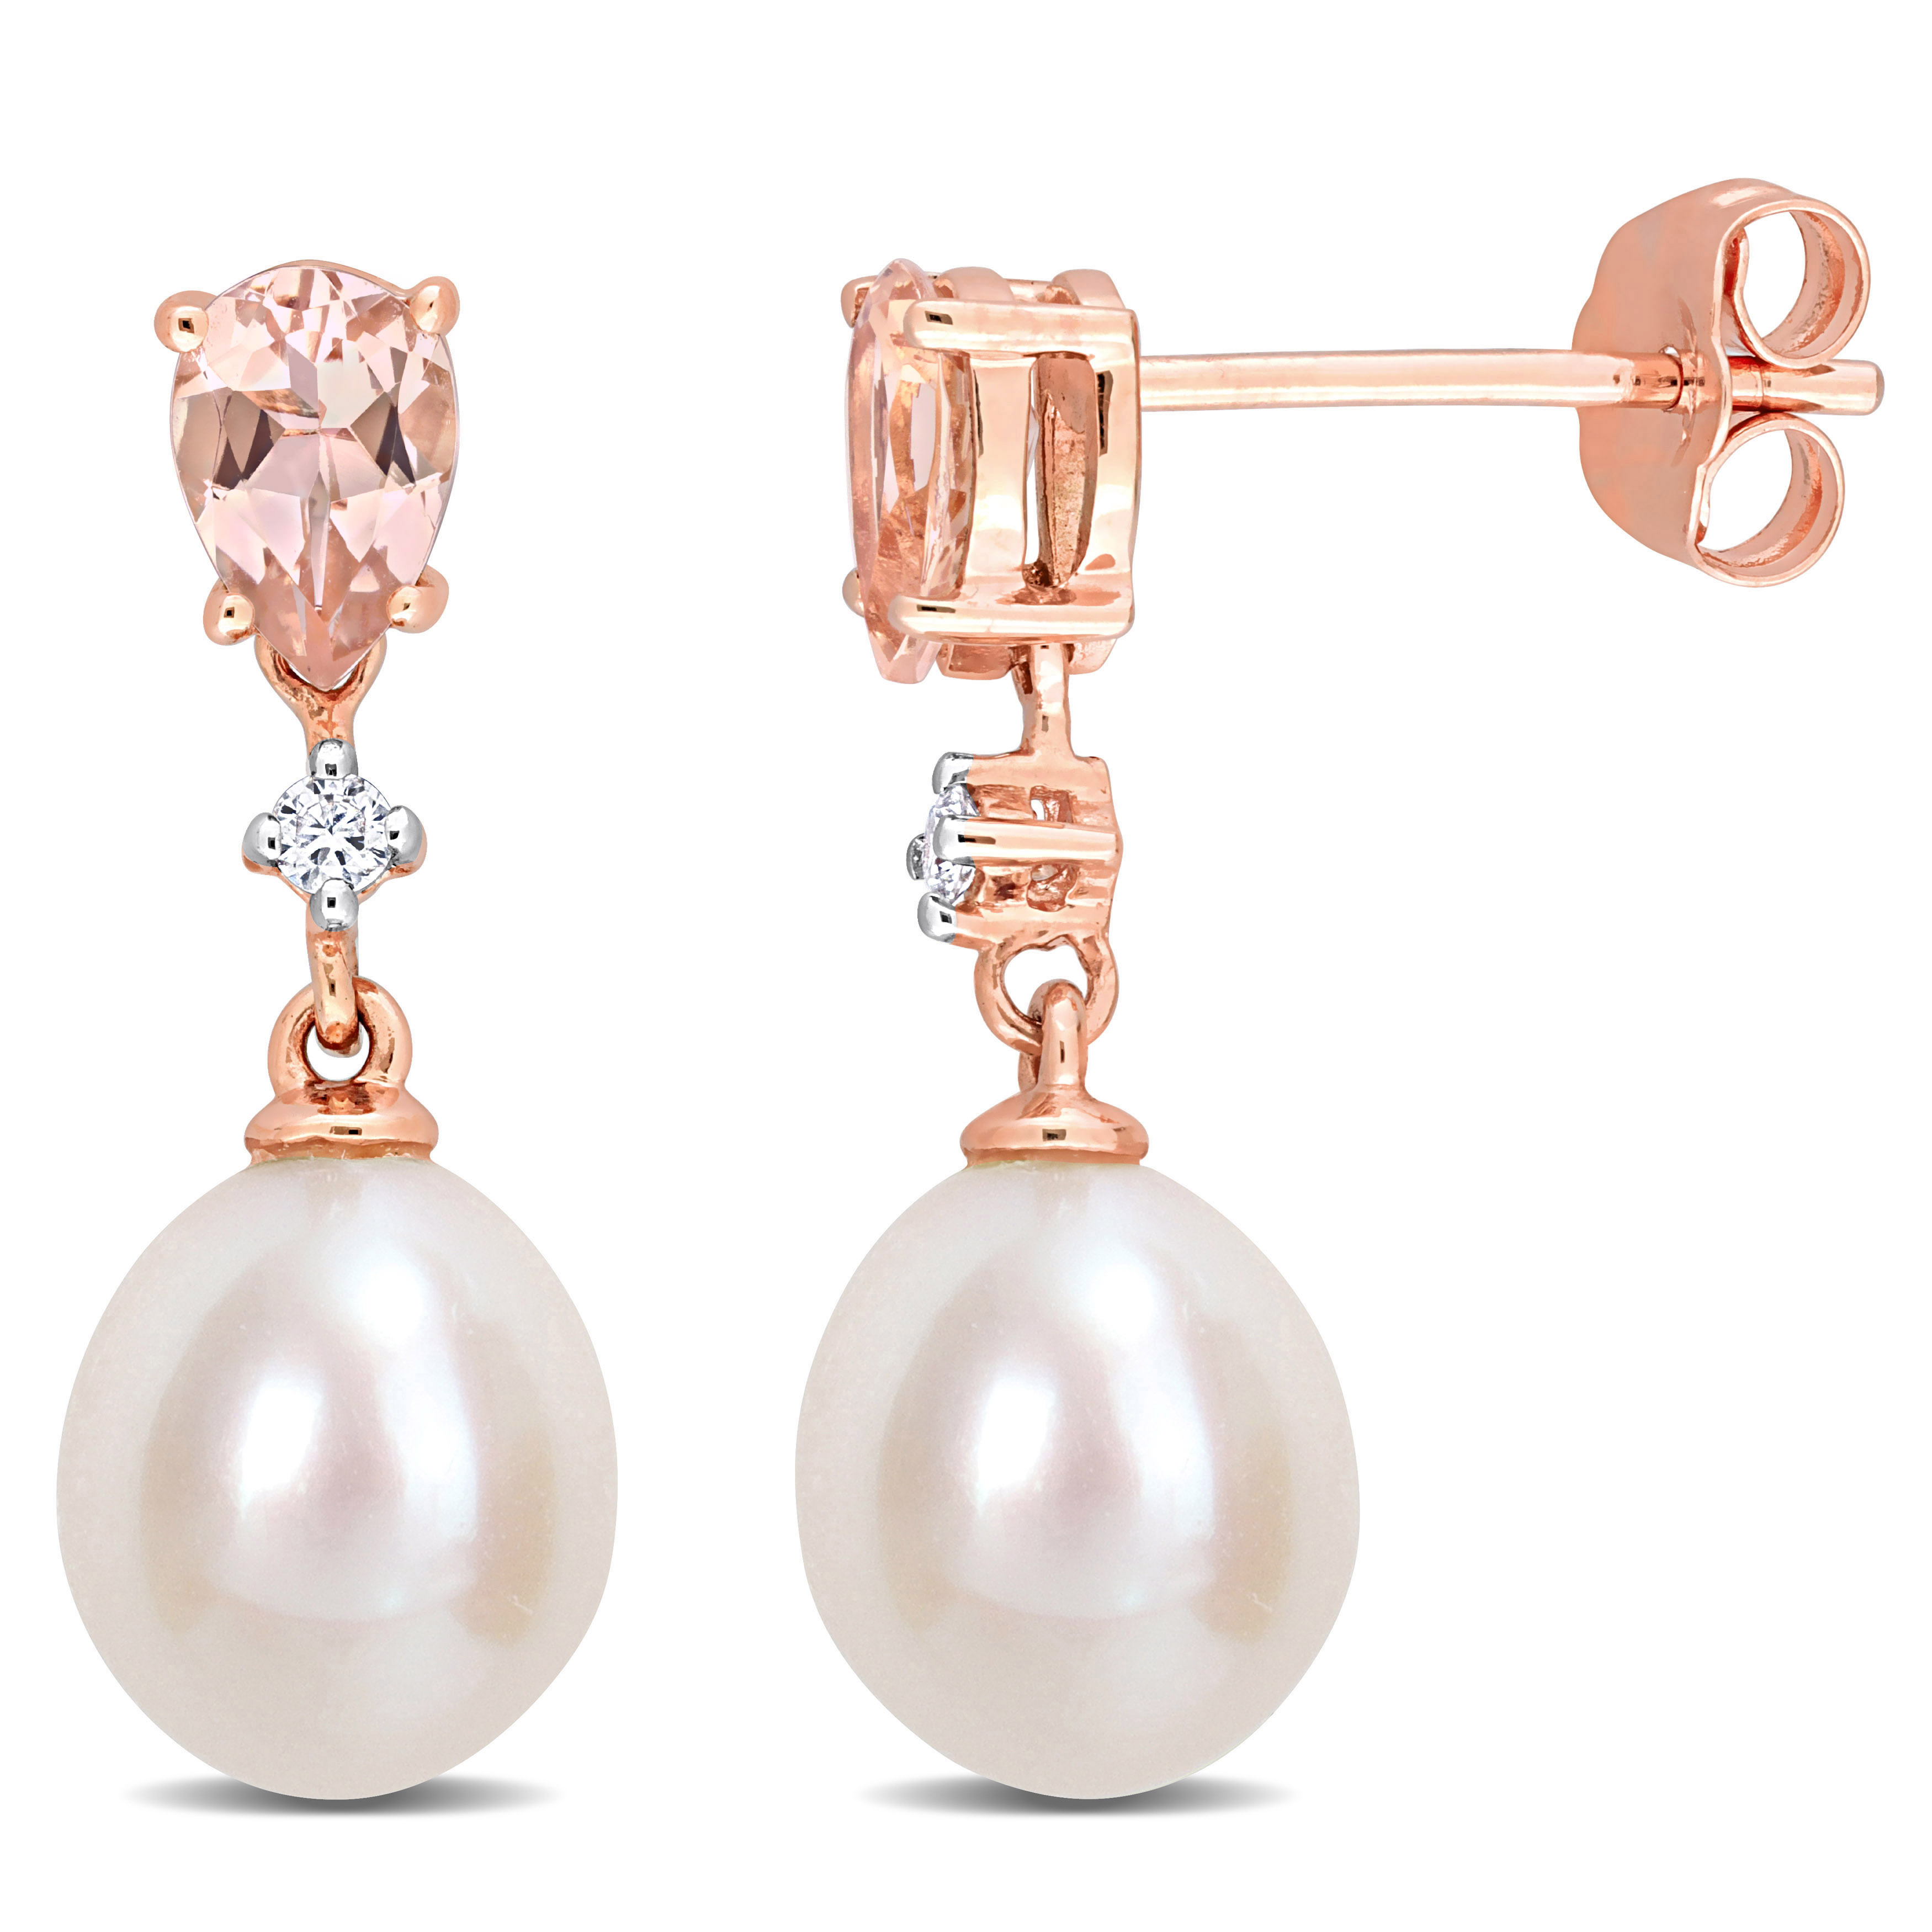 8-8.5 MM Freshwater Cultured Pearl 4/5 CT TGW Morganite and Diamond Accent Drop Stud Earrings in 14k Rose Gold